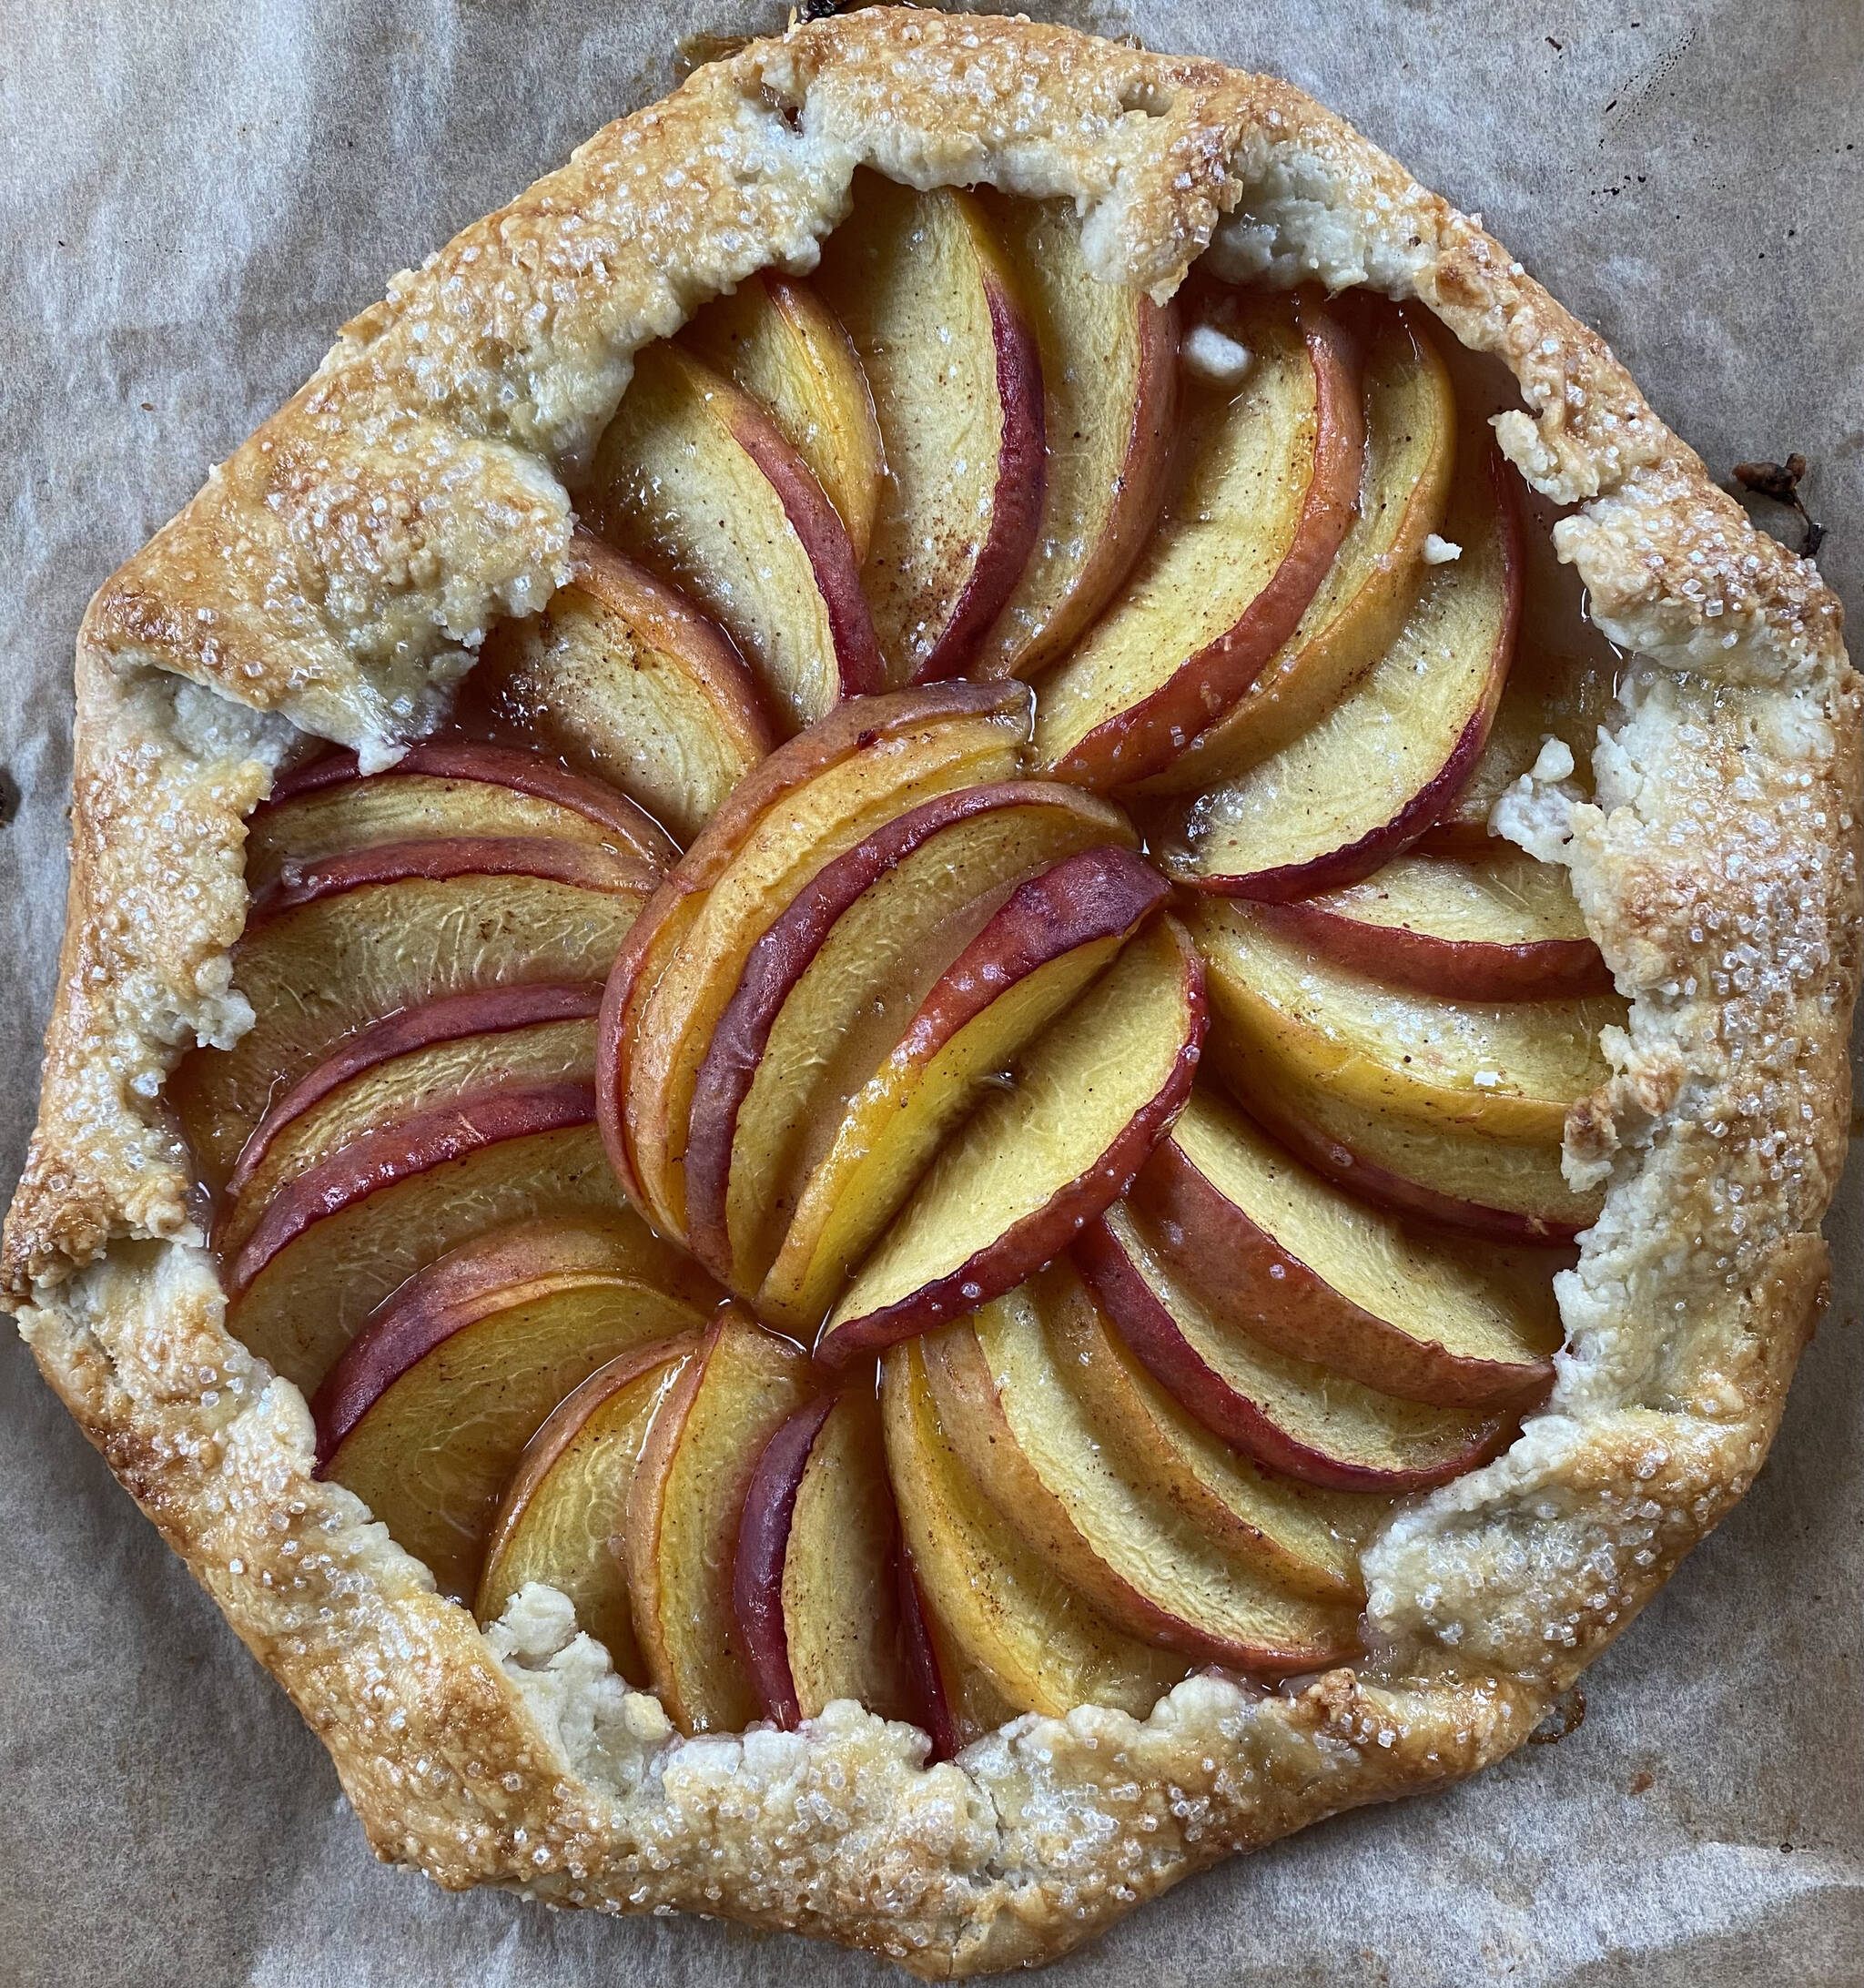 Fresh ripe peaches are wrapped in a buttery crust in this peach galette recipe. (Photo by Tressa Dale/Peninsula Clarion)